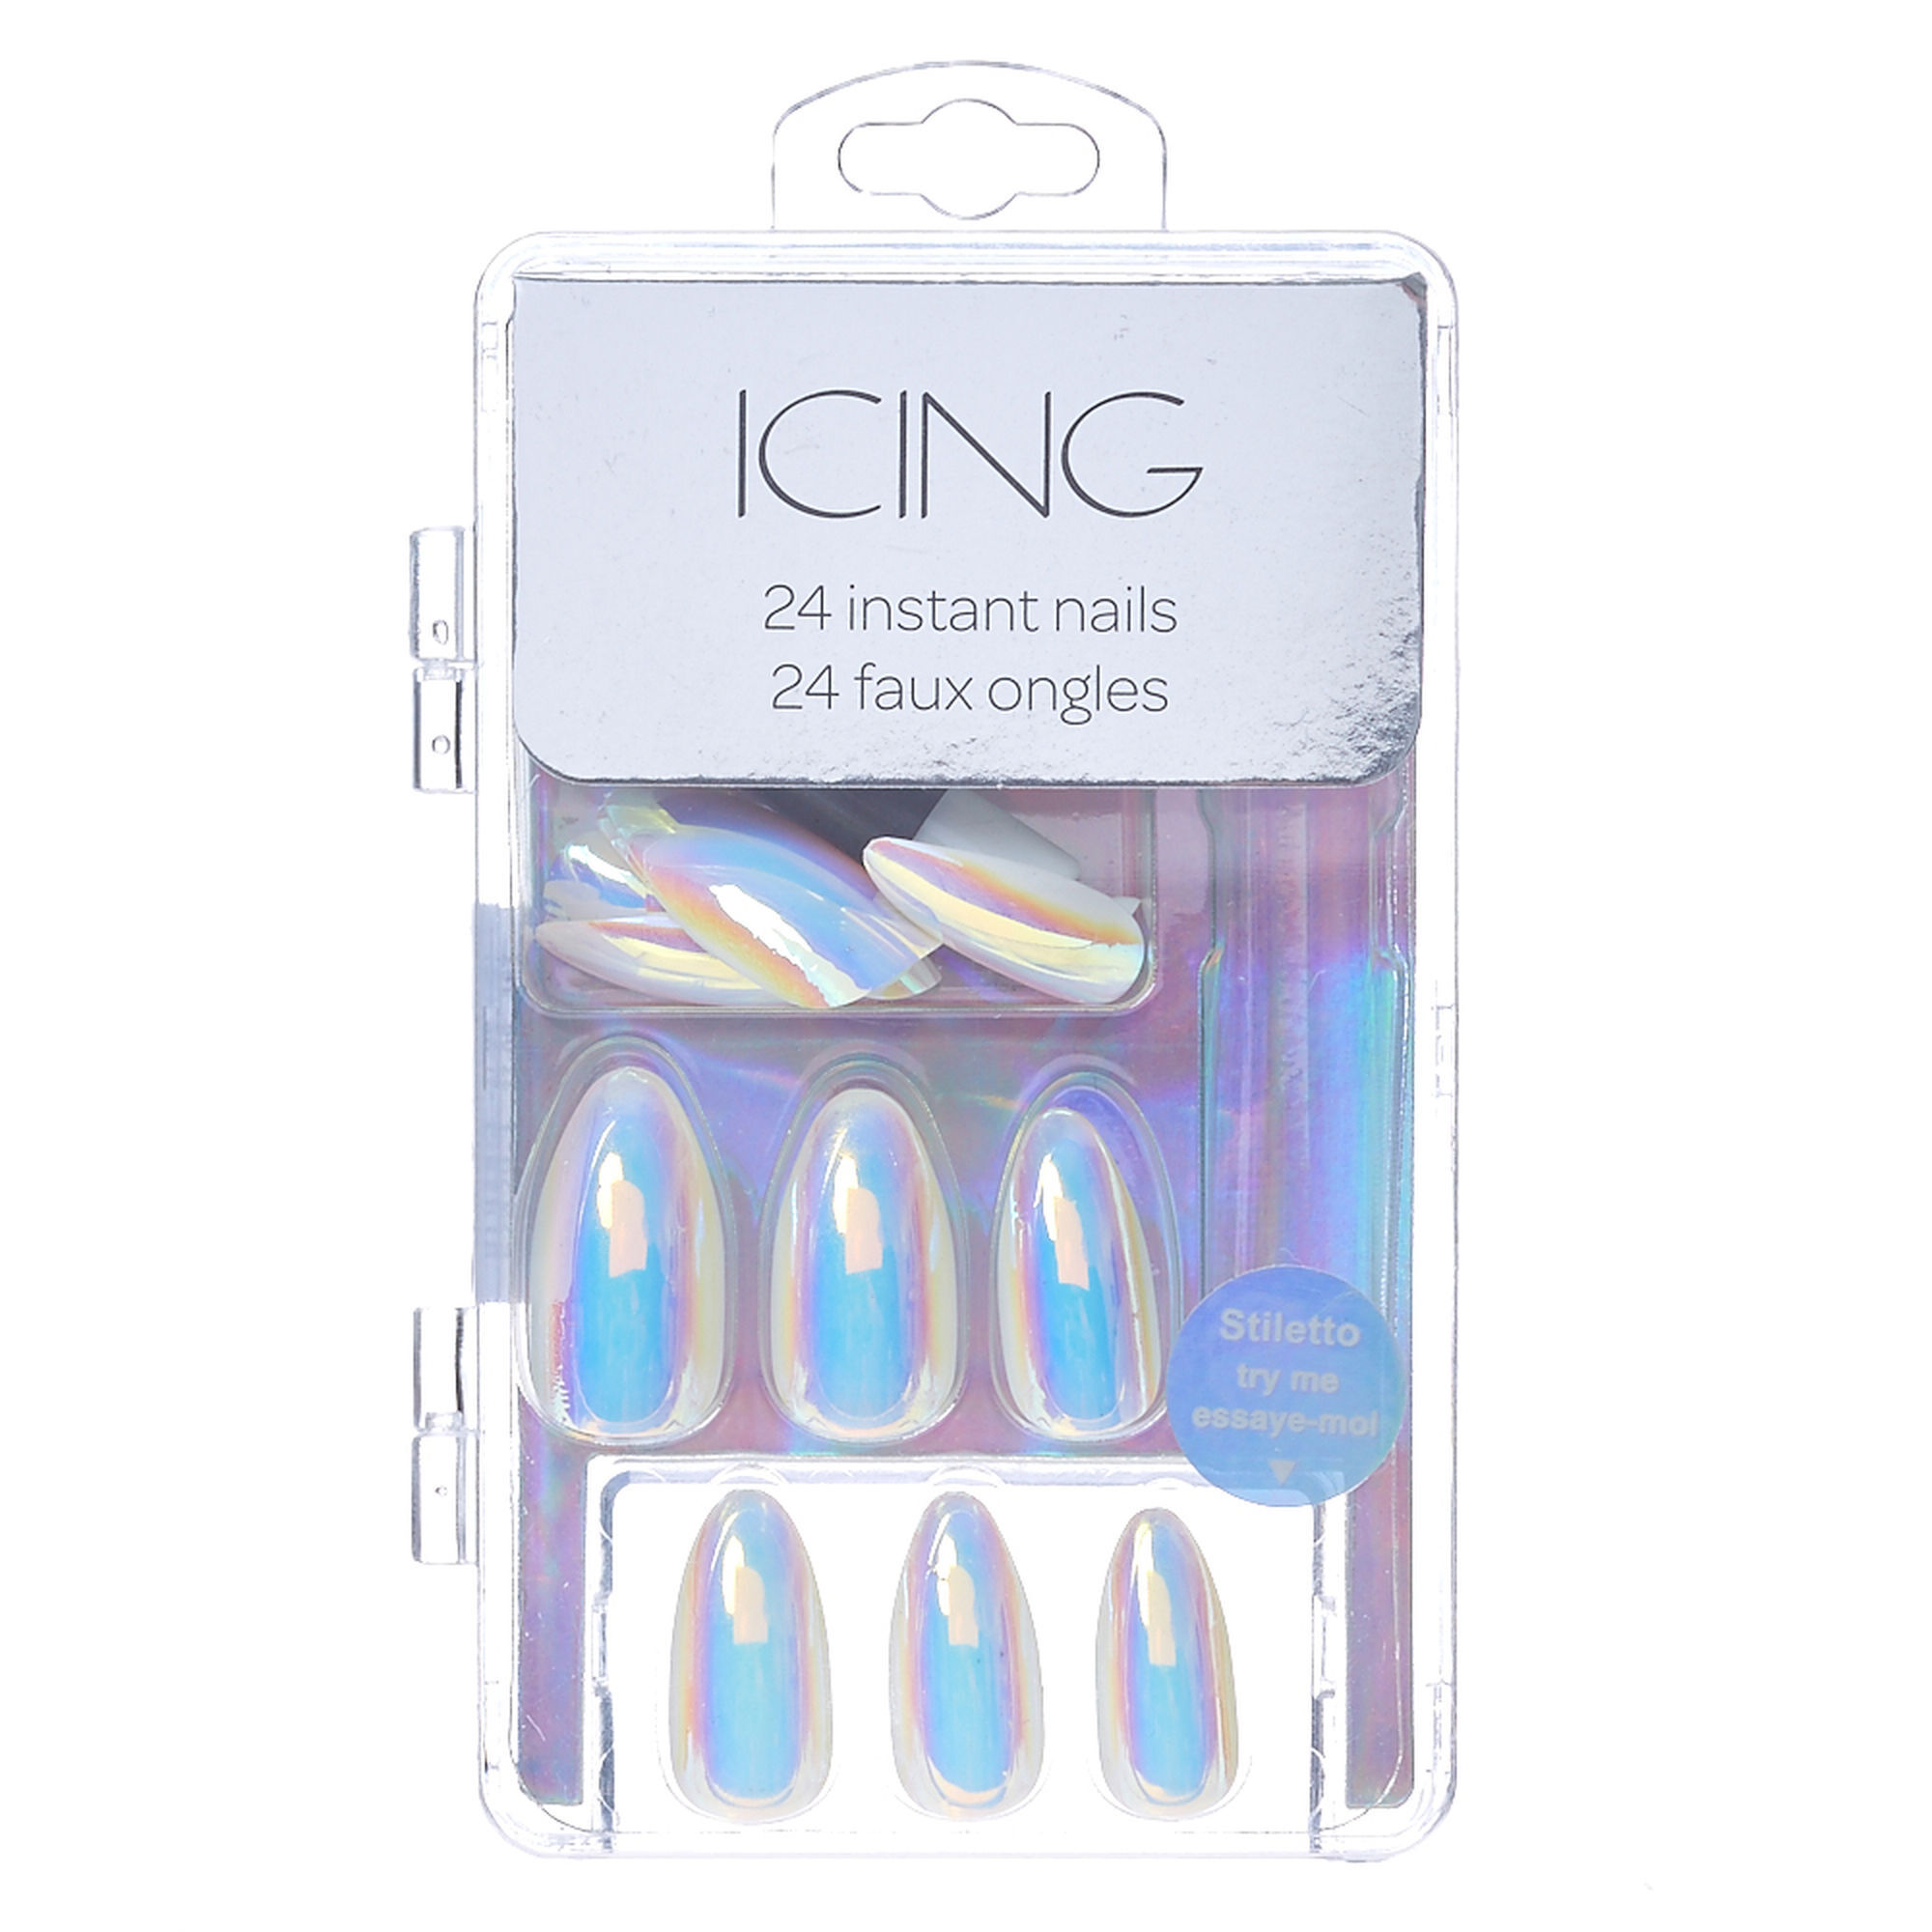 Iridescent Instant Nails | Icing US